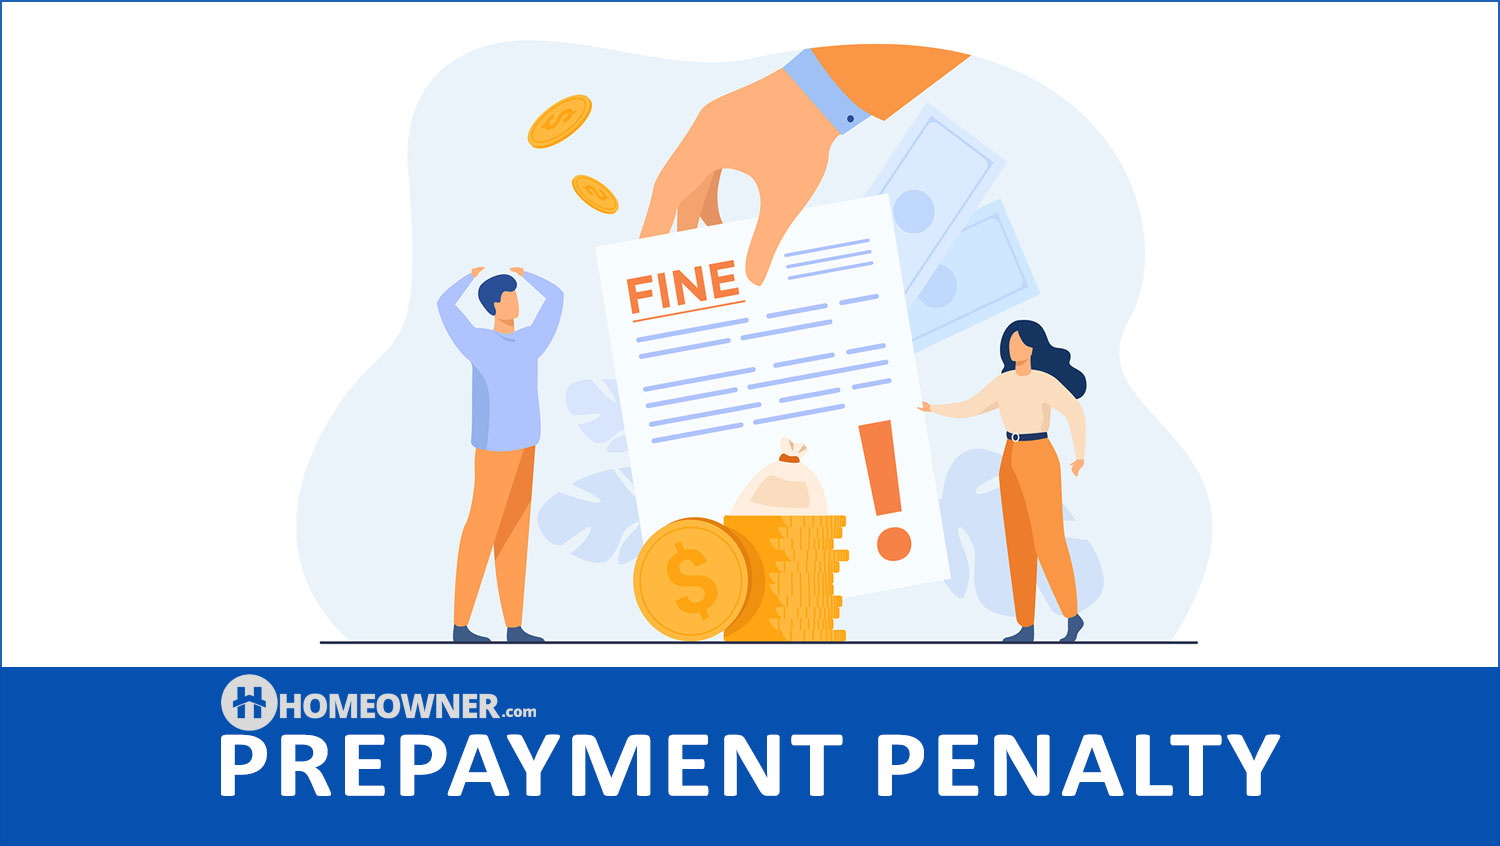 What Is a Prepayment Penalty?